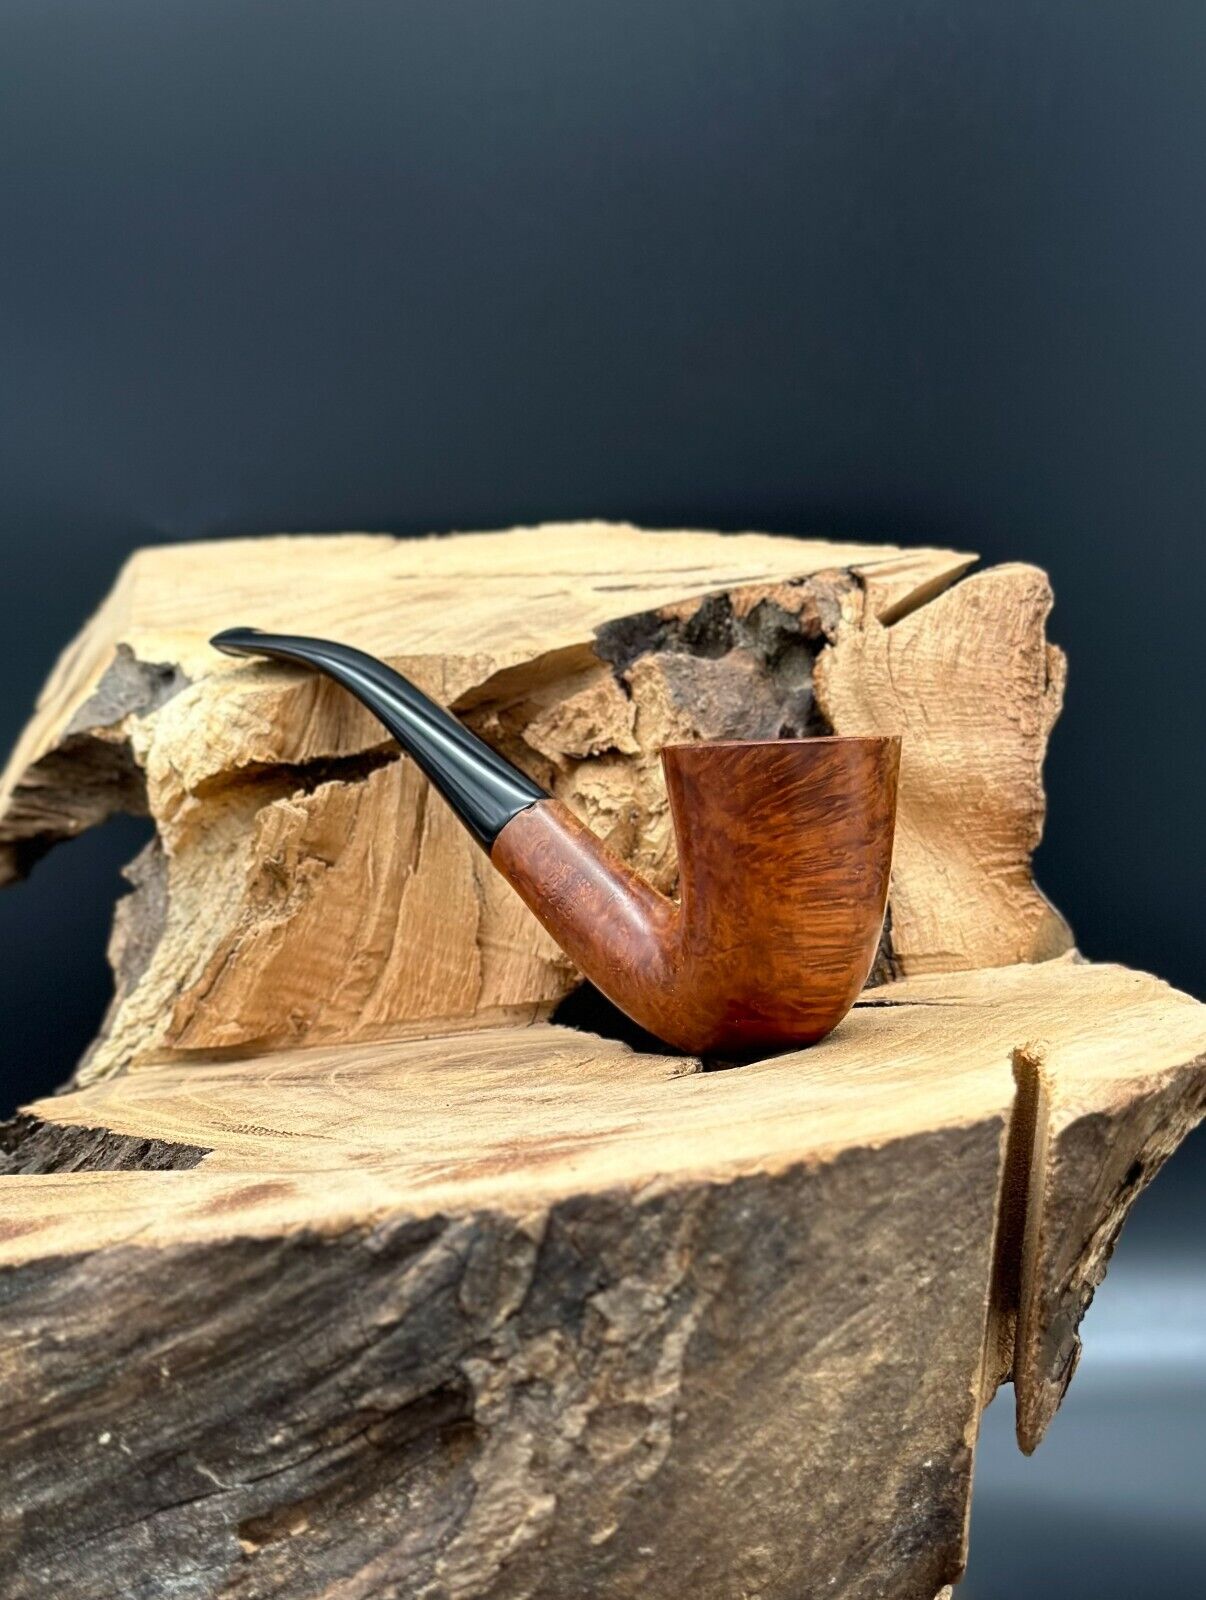 Butz Choquin Old Root 1283 Smooth Finish Bent Dublin Shaped Smoking Pipe